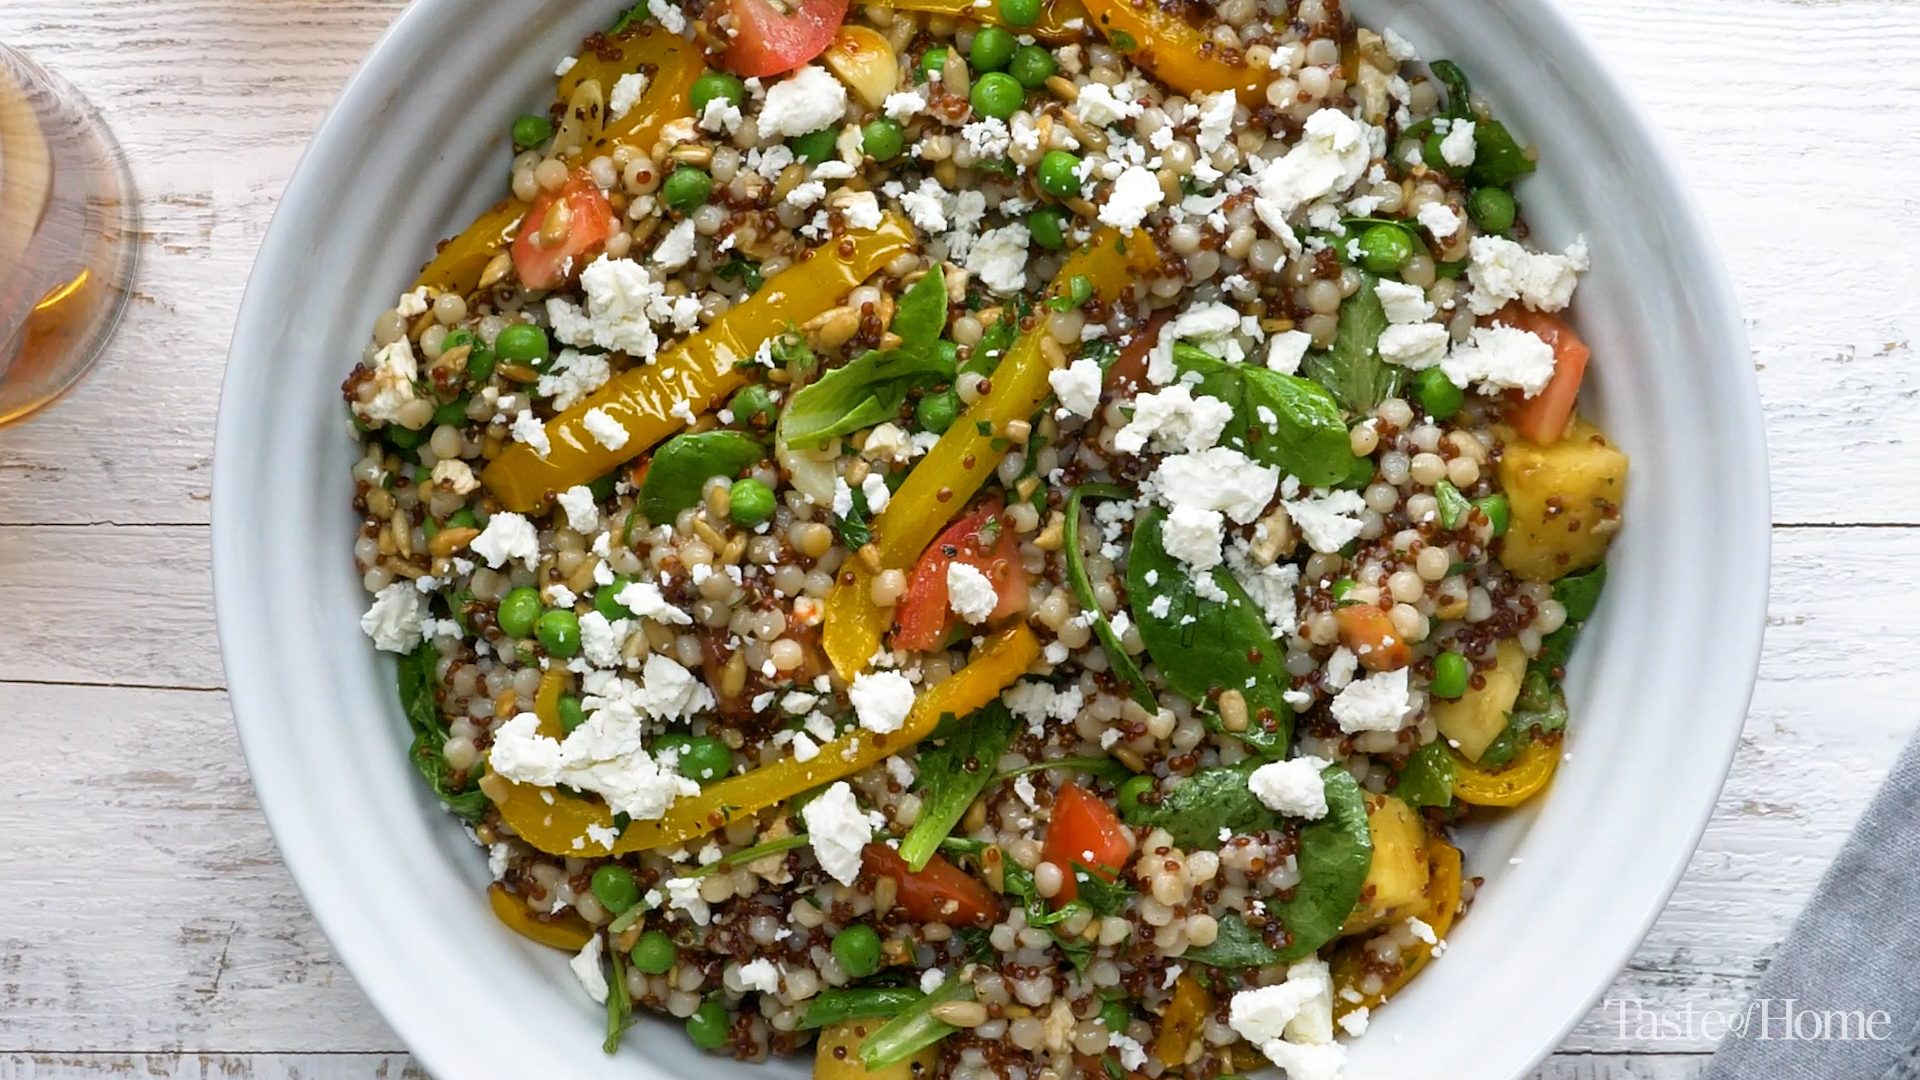 Is Quinoa Good for People with Diabetes?